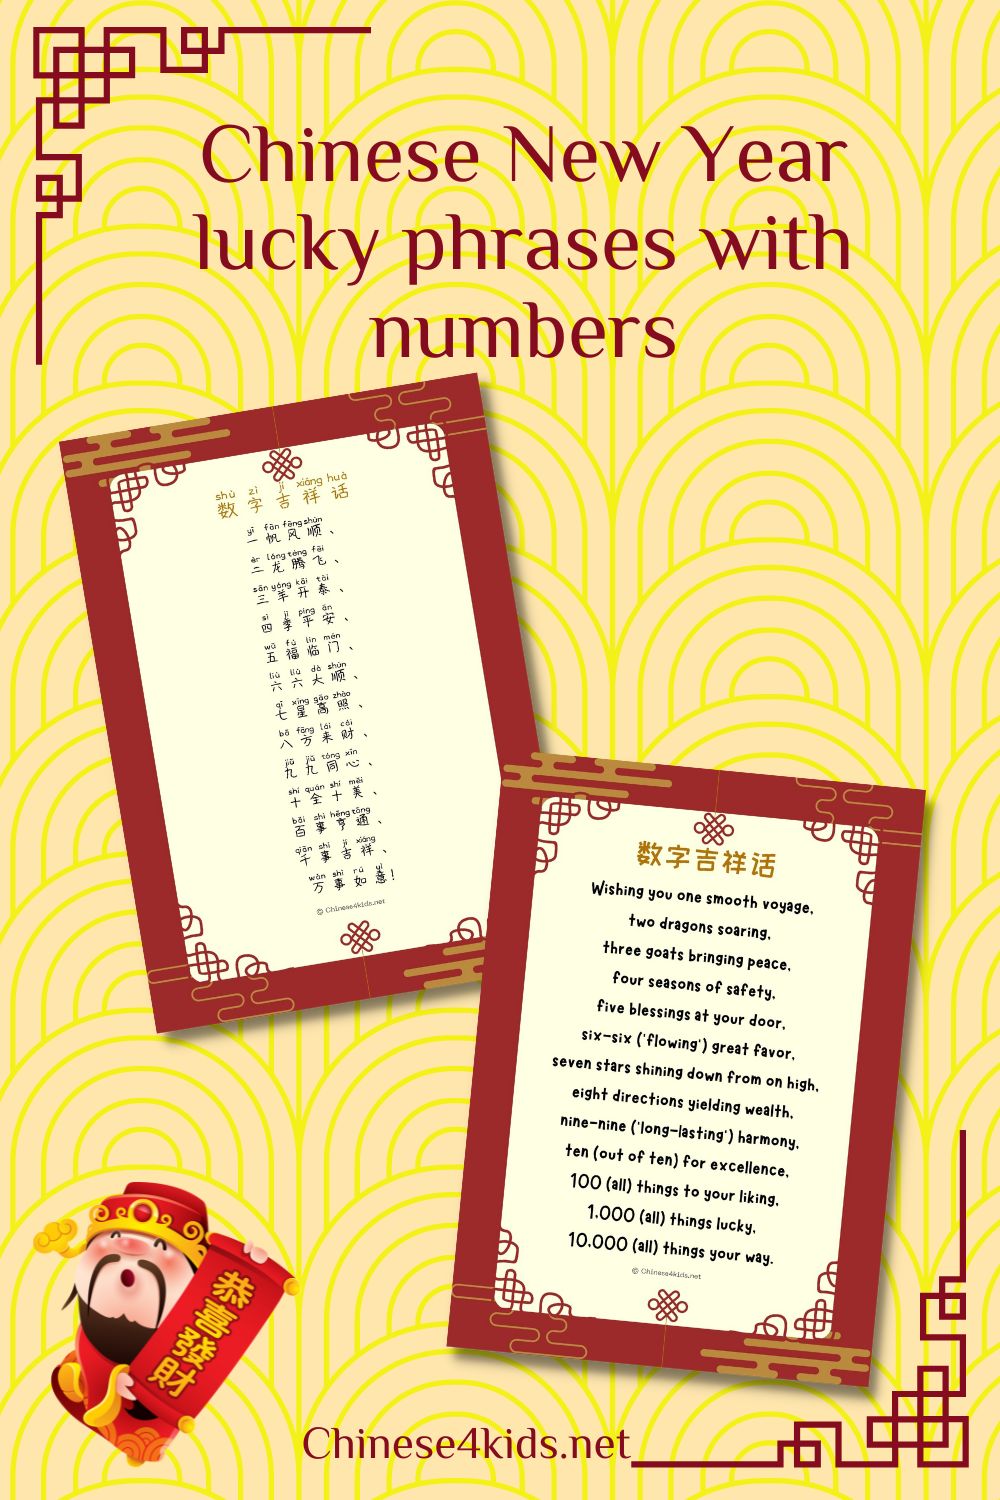 Chinese lucky phrases starting with numbers #Chinesenewyear #SpringFestival #luckyphrases #learnChinese #mandarinChinese #expressiveChinese #Chinese4kids